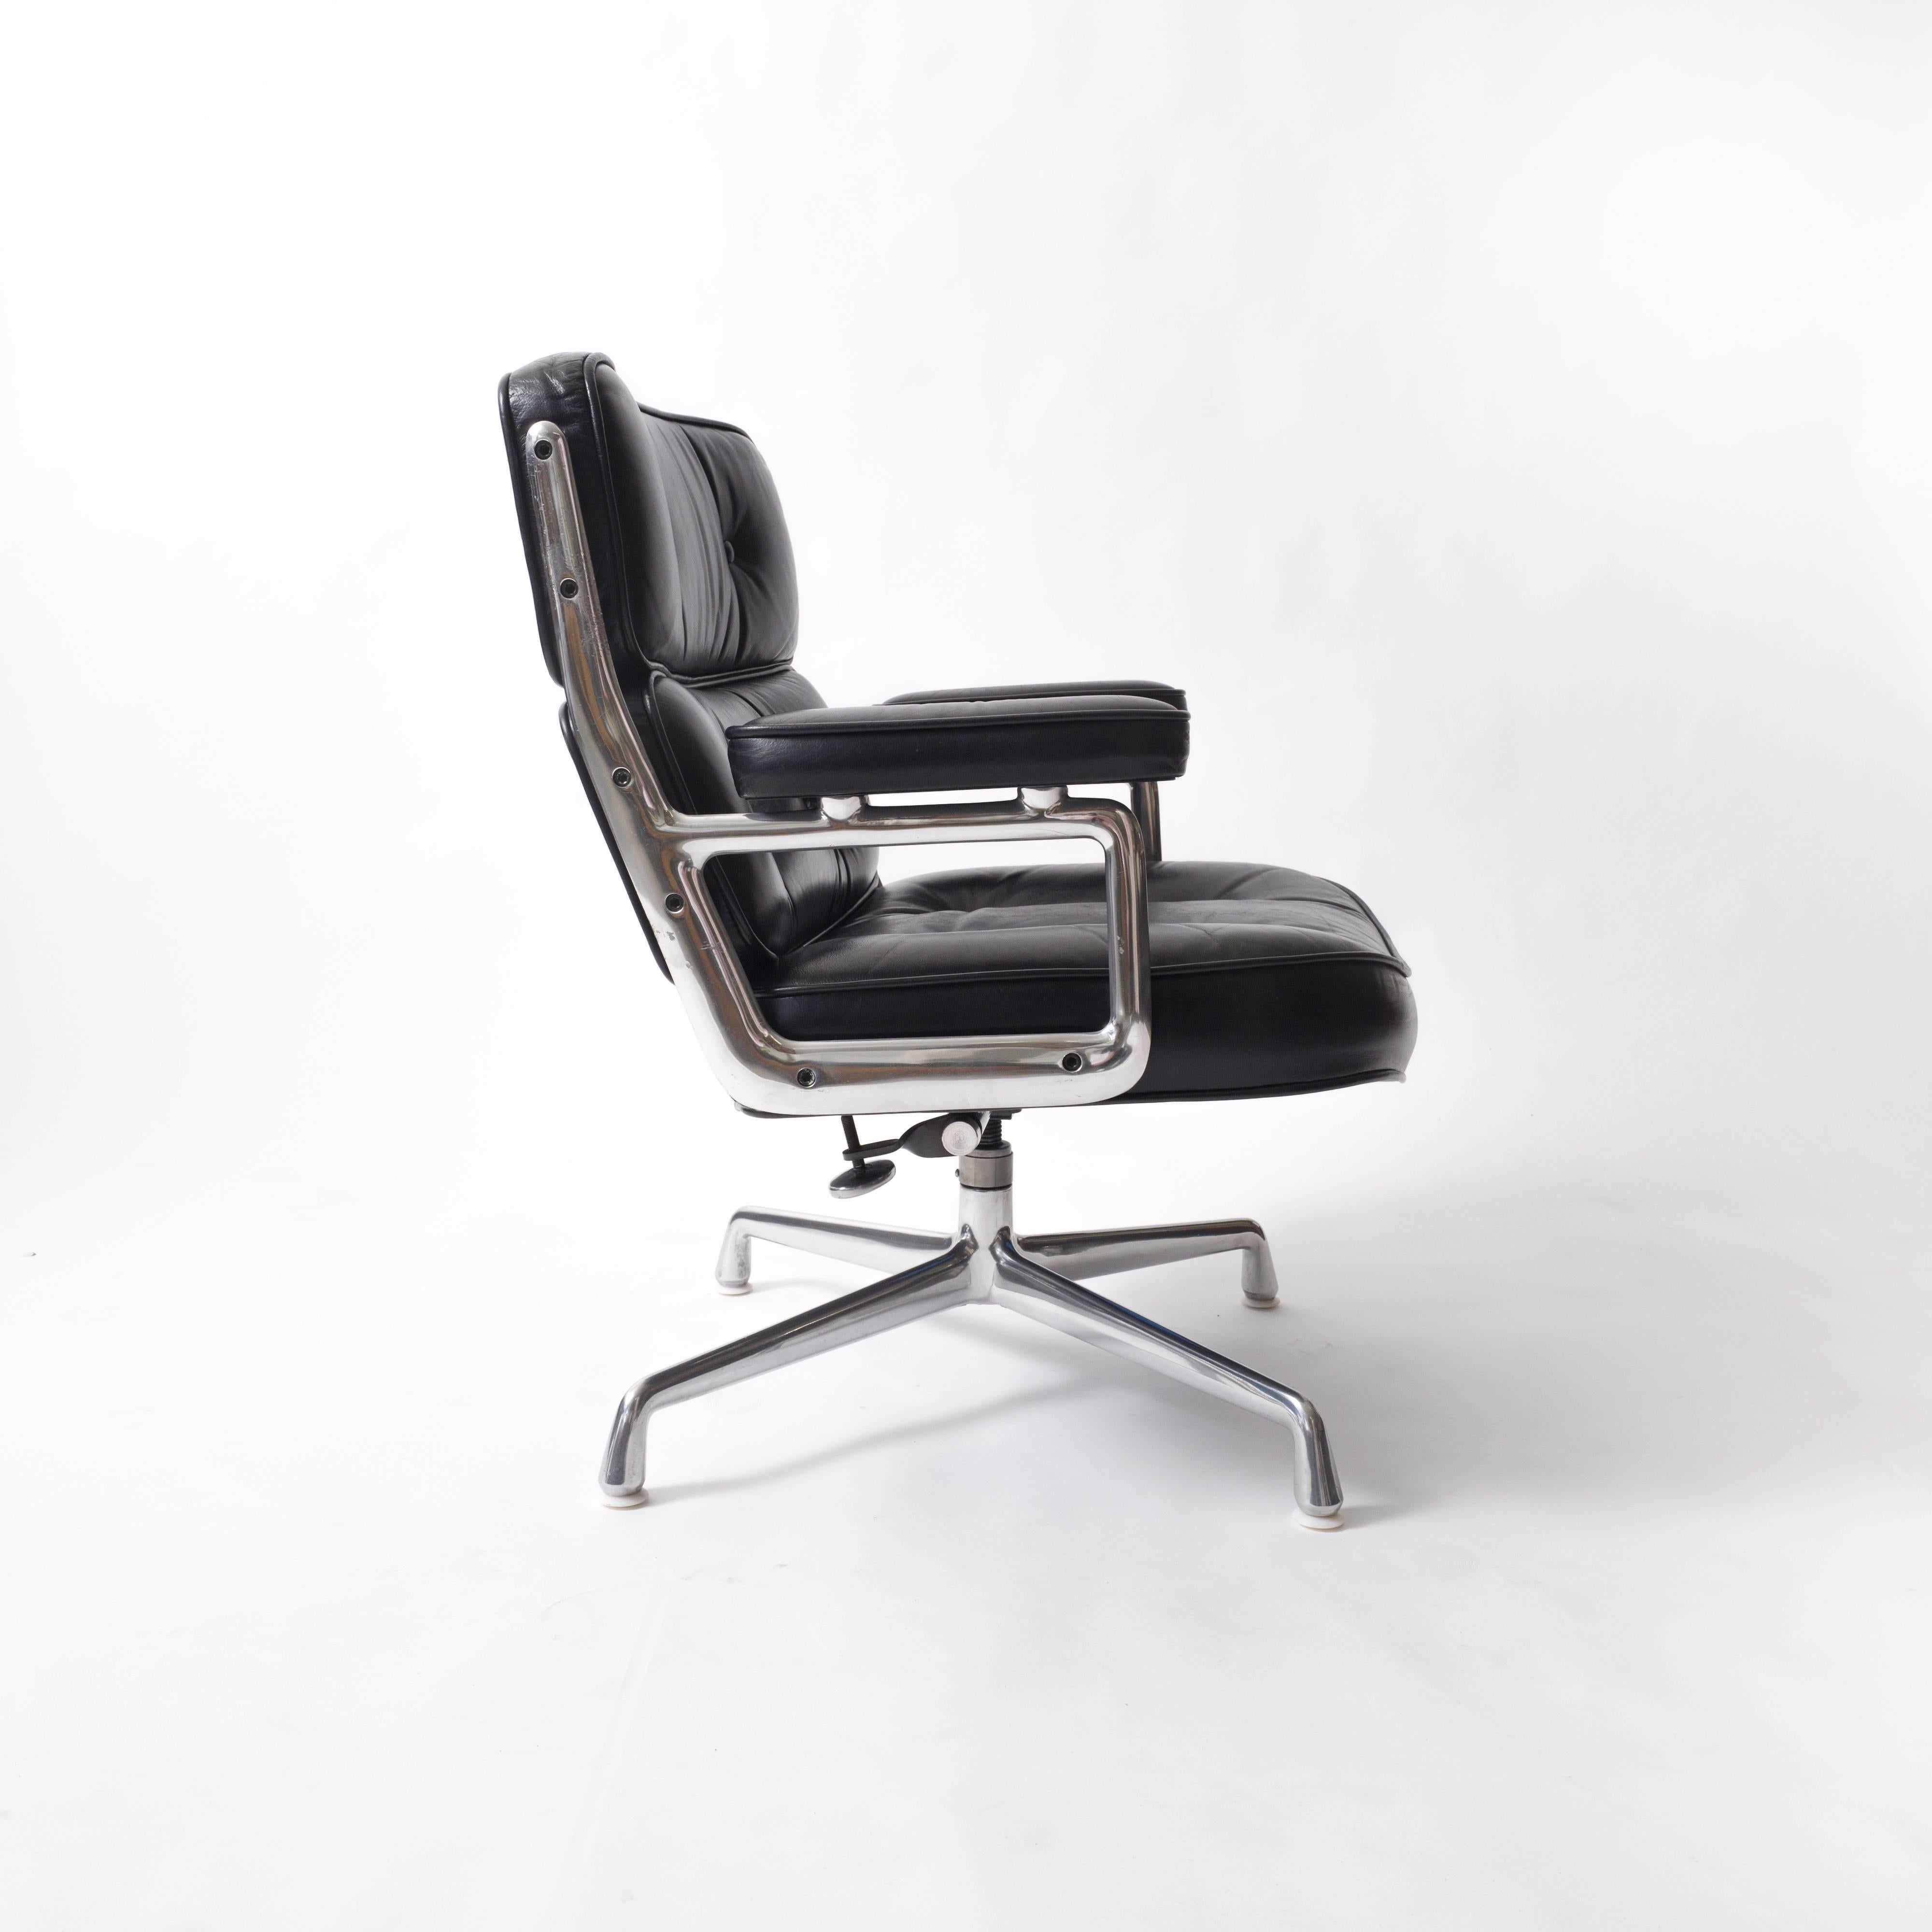 American Eames Time Life Lobby Chairs for Herman Miller